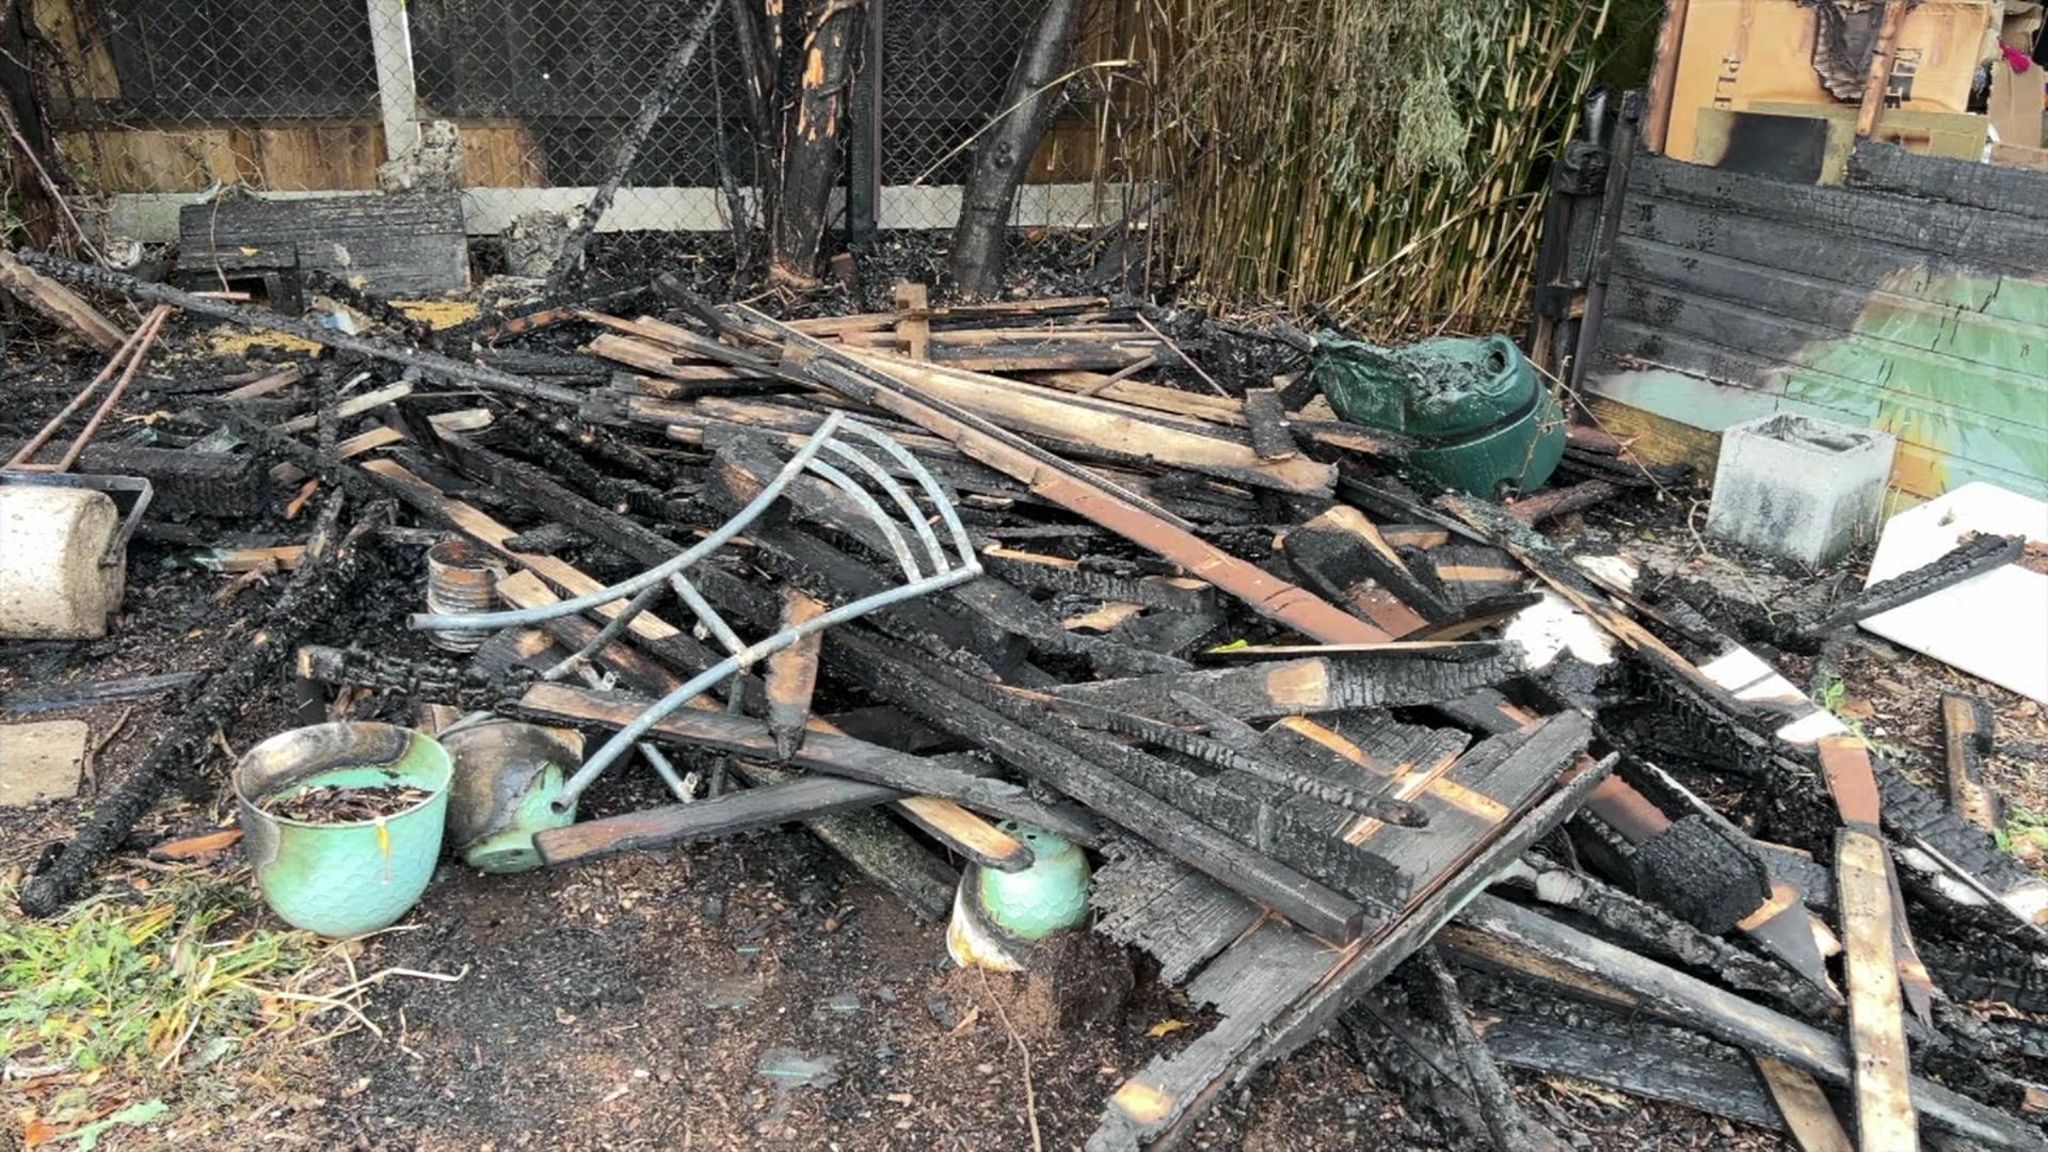 A pile of garden items which were damaged by the fire